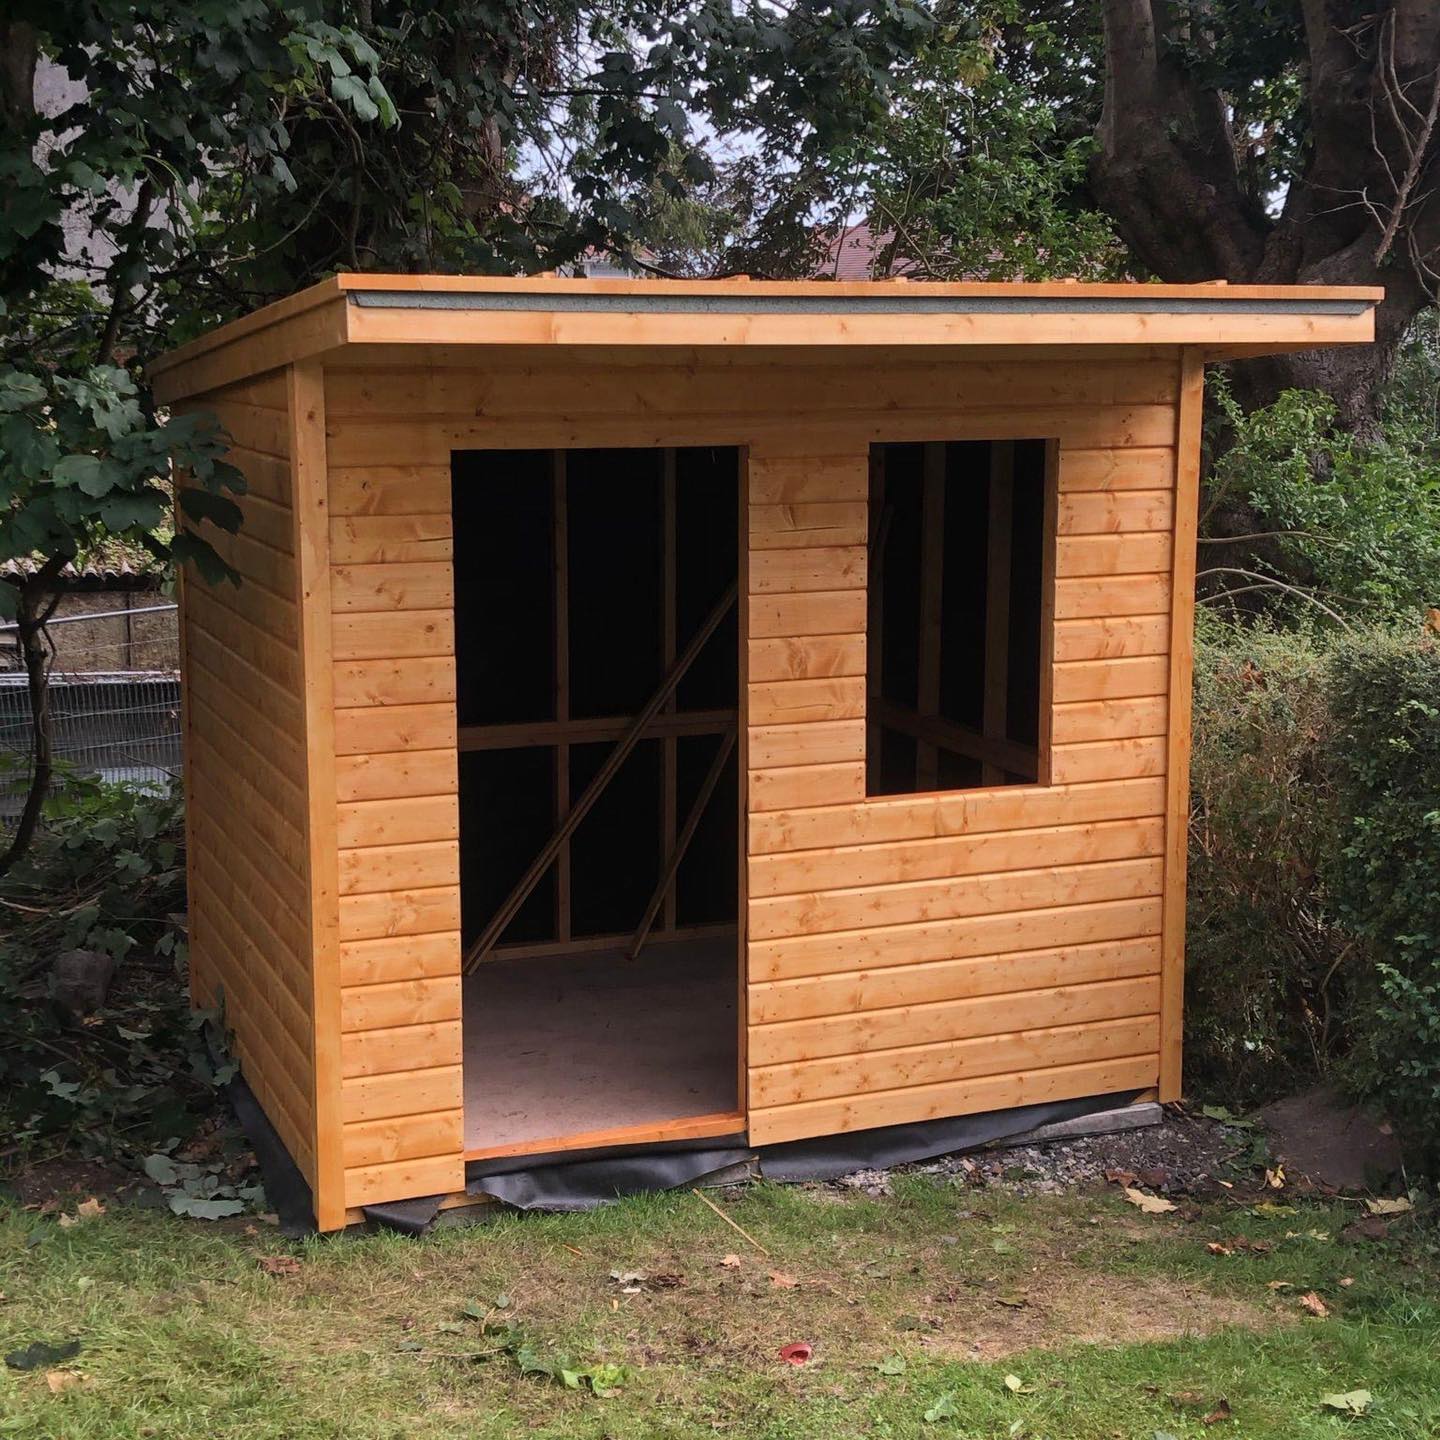 9' x 7' Garden office with 3x2 framework and pvc supplied and installed by customer.